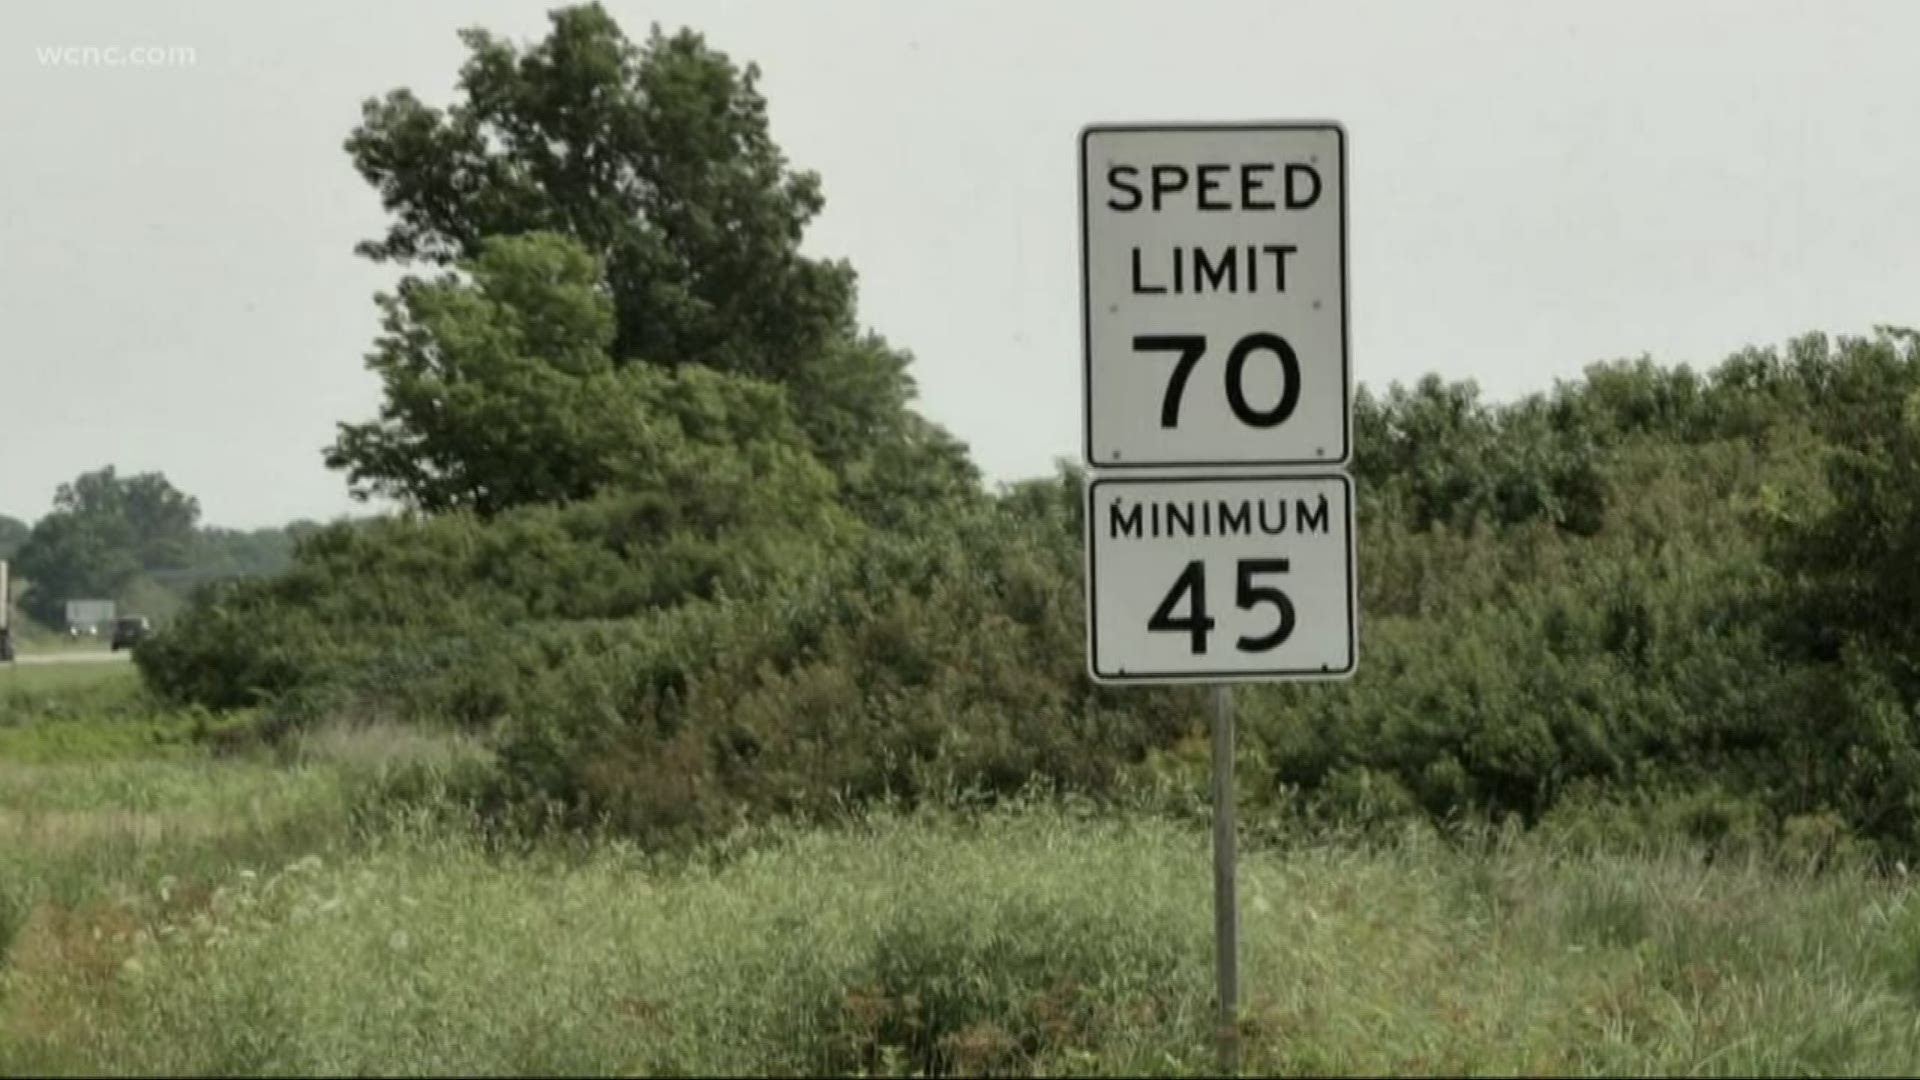 Right now, the minimum speed in 70 mph zones is 45 mph. But some lawmakers think that's just too slow, and they want to raise it to at least 50 mph.